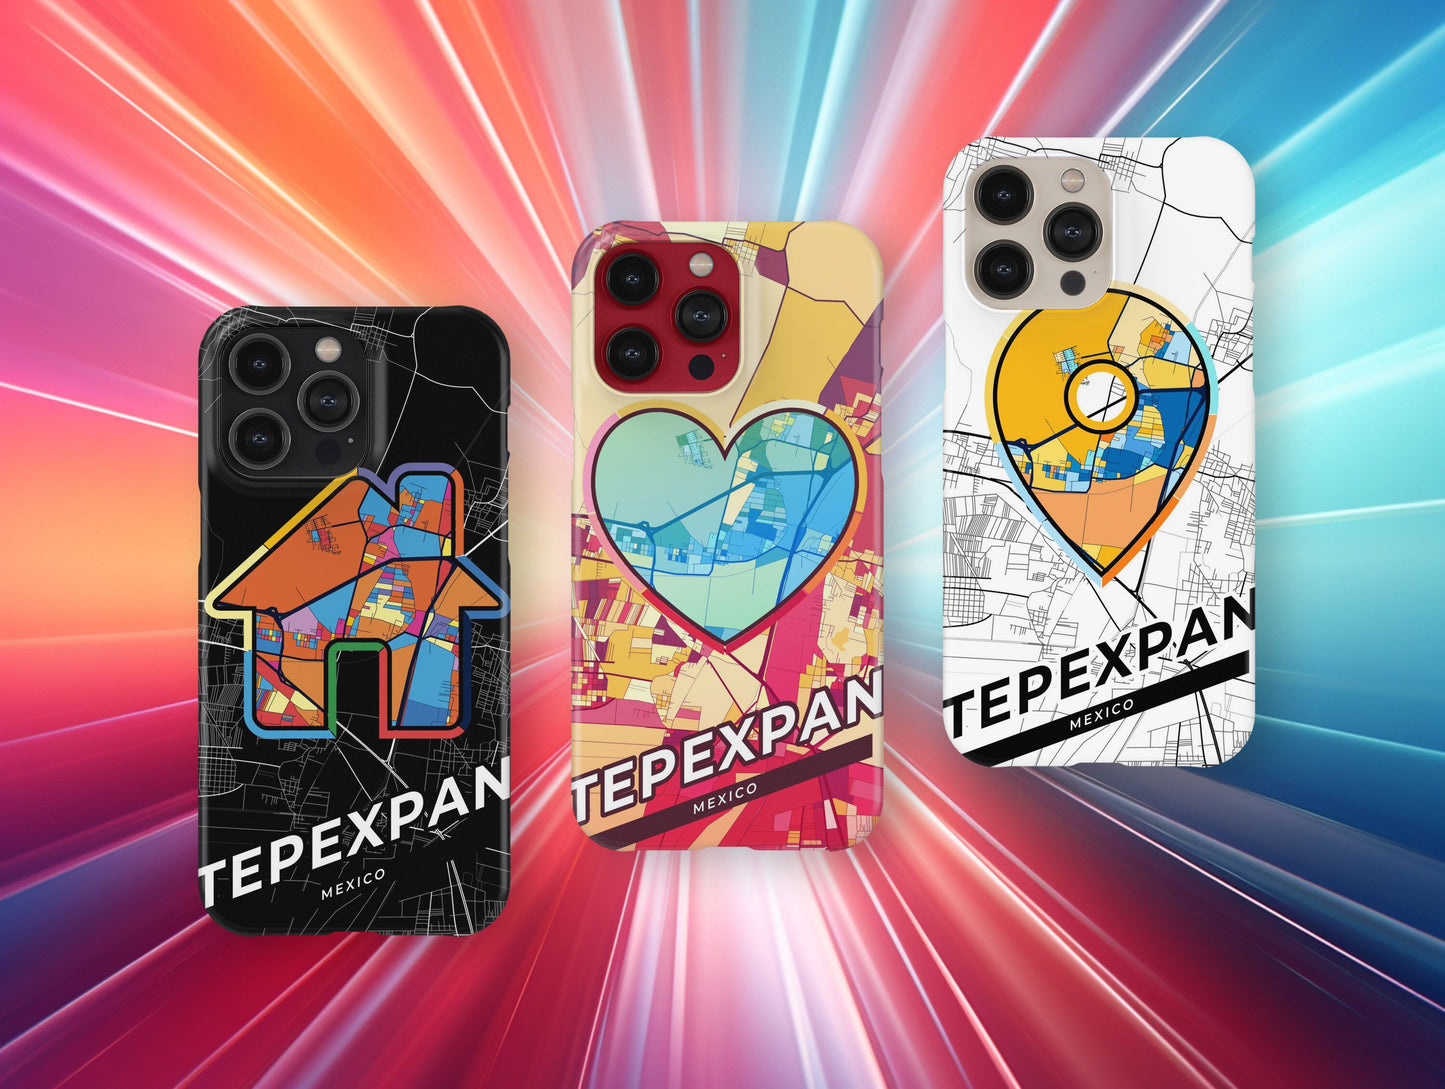 Tepexpan Mexico slim phone case with colorful icon